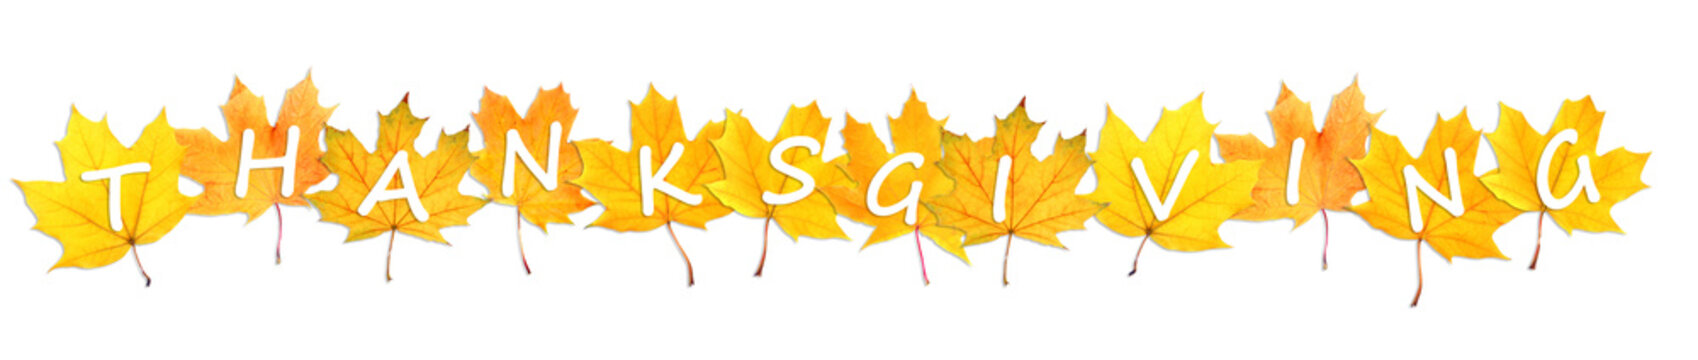 Happy Thanksgiving Day. Autumn leaves with text isolated on white